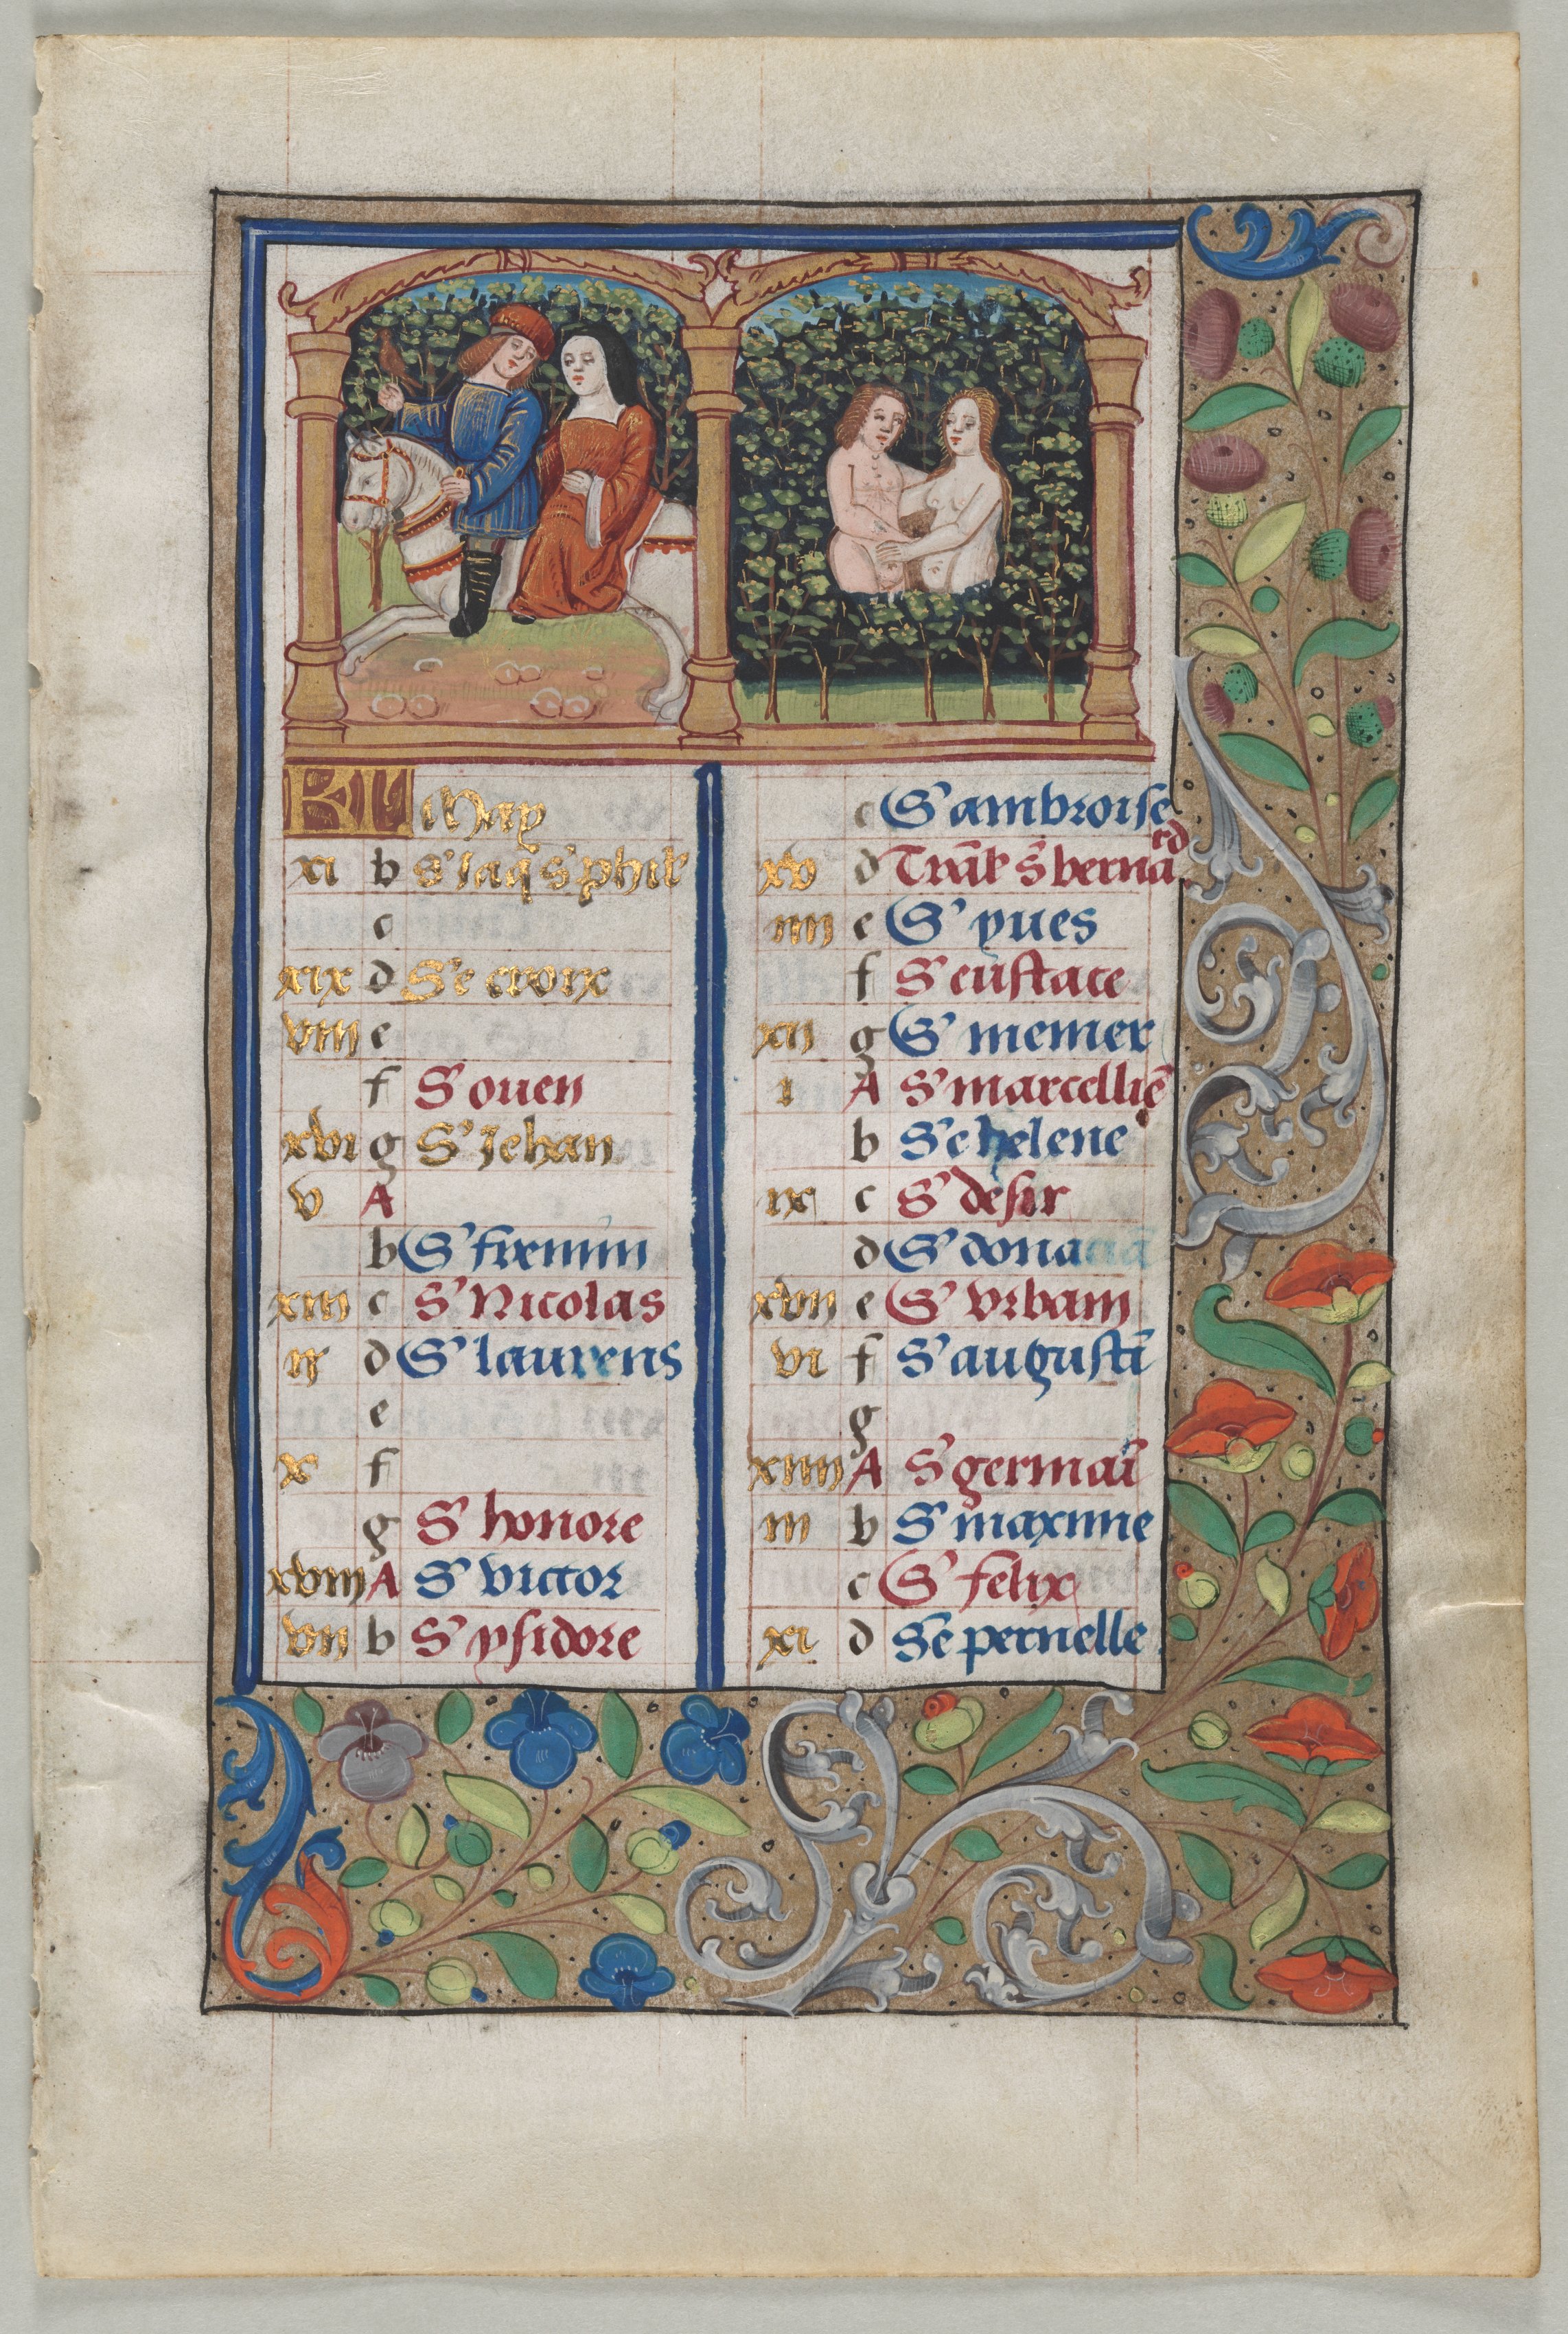 Leaf from a Book of Hours: Calendar Page for May (recto)